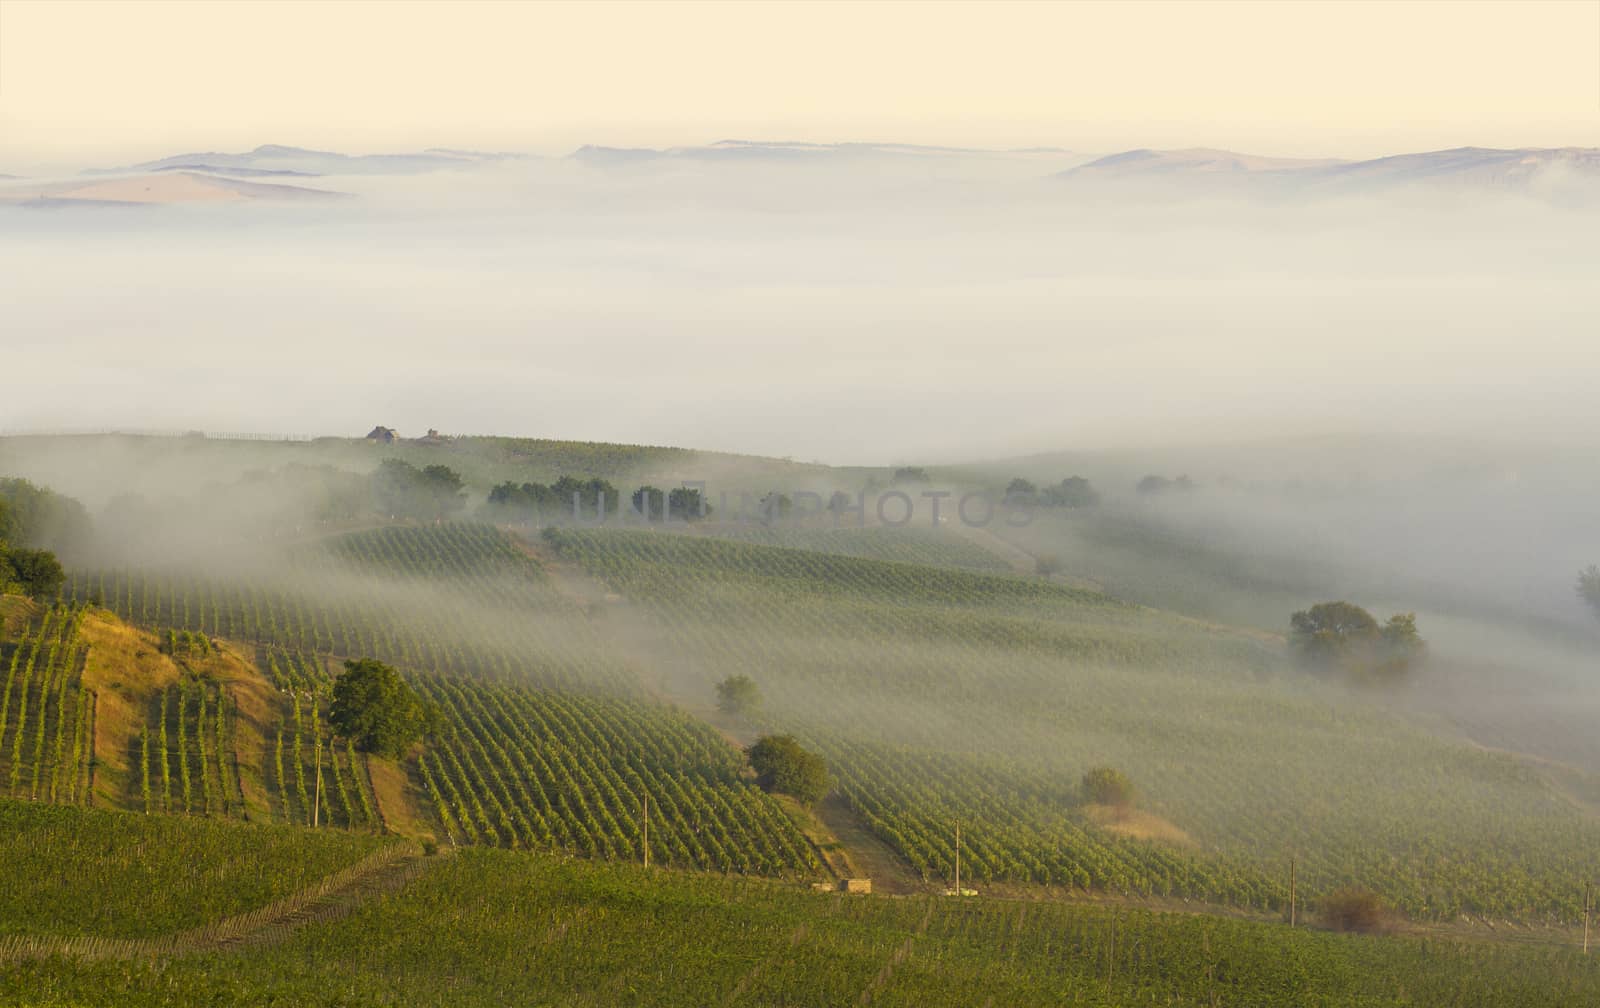 Landscape of a vineyard in the morning fog with mountain showing in the distant background